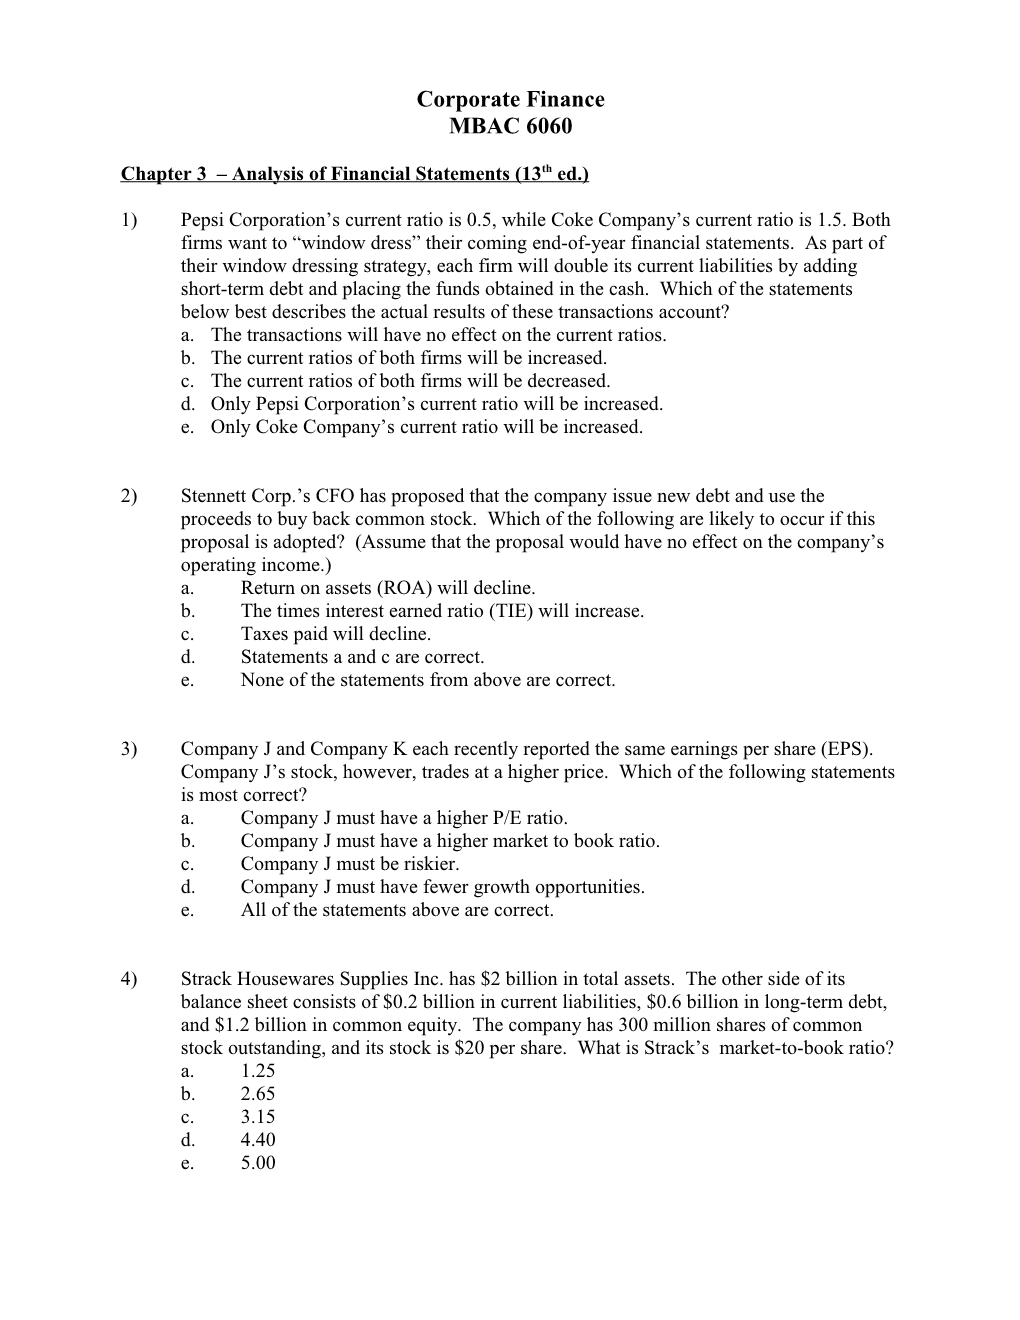 Chapter 3 Analysis of Financial Statements (13Th Ed.)